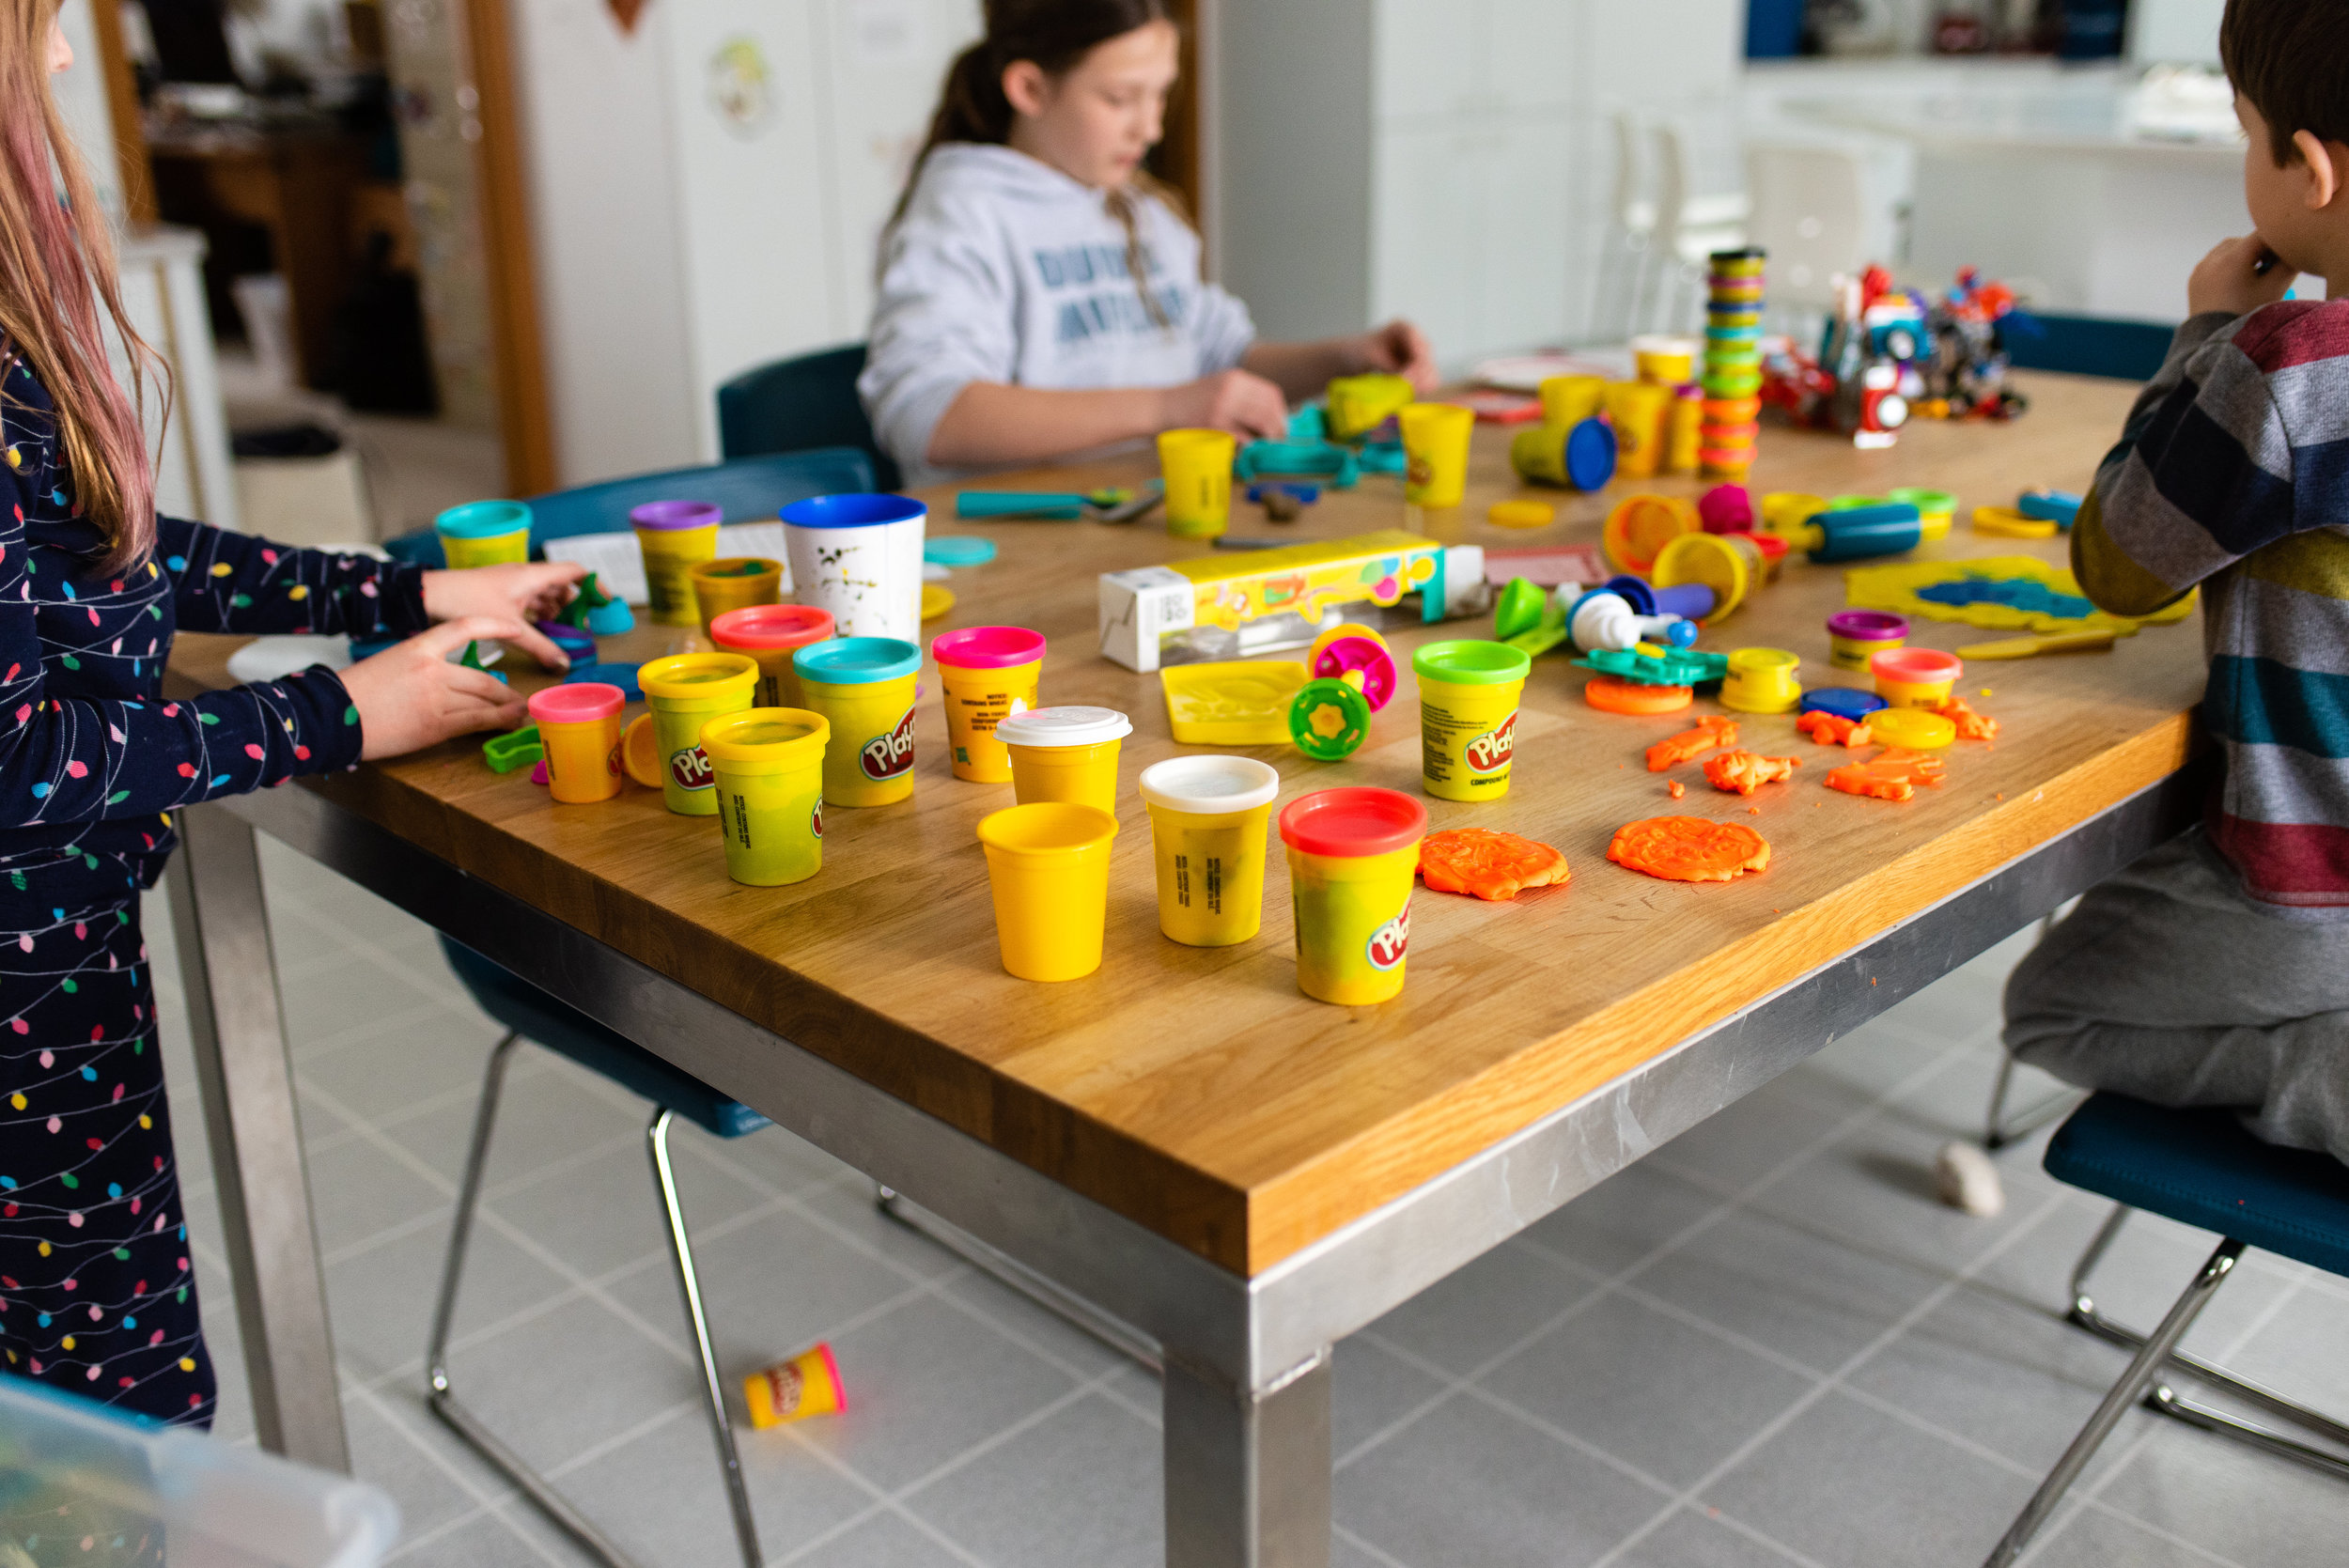 children playing with play-doh at a table.jpg